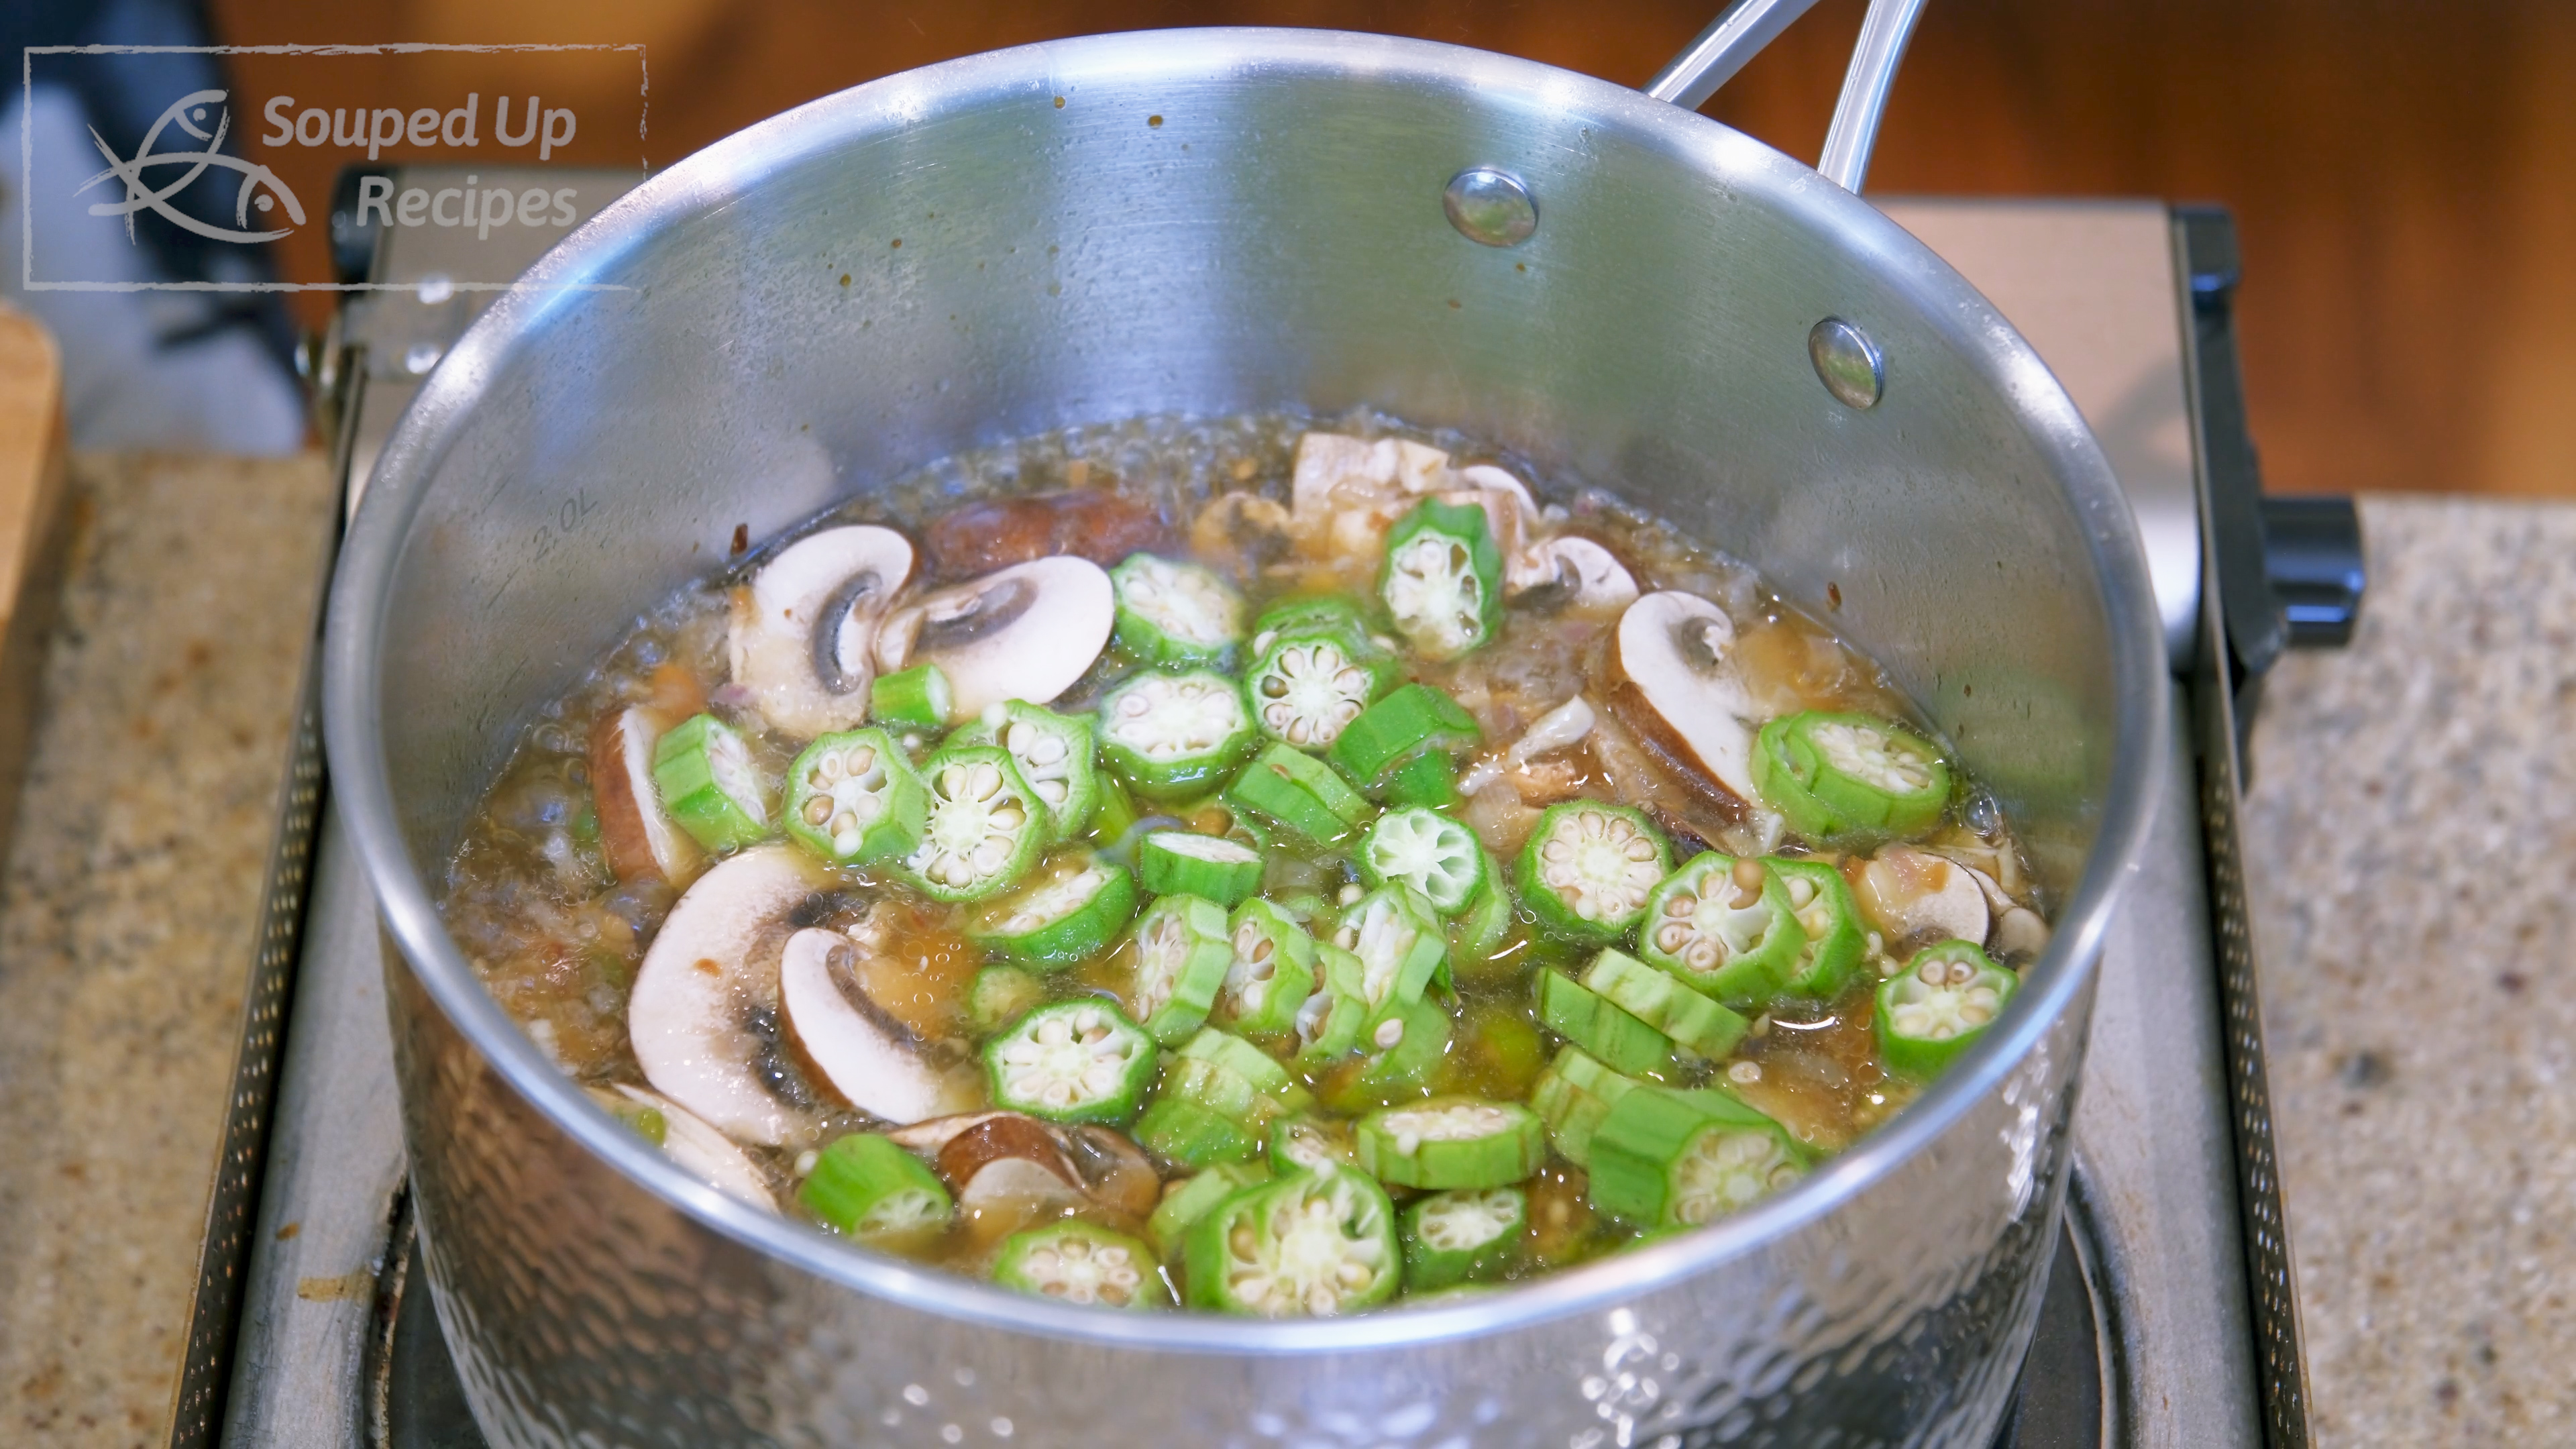 Image of Once the water comes to a boil, add the okra...